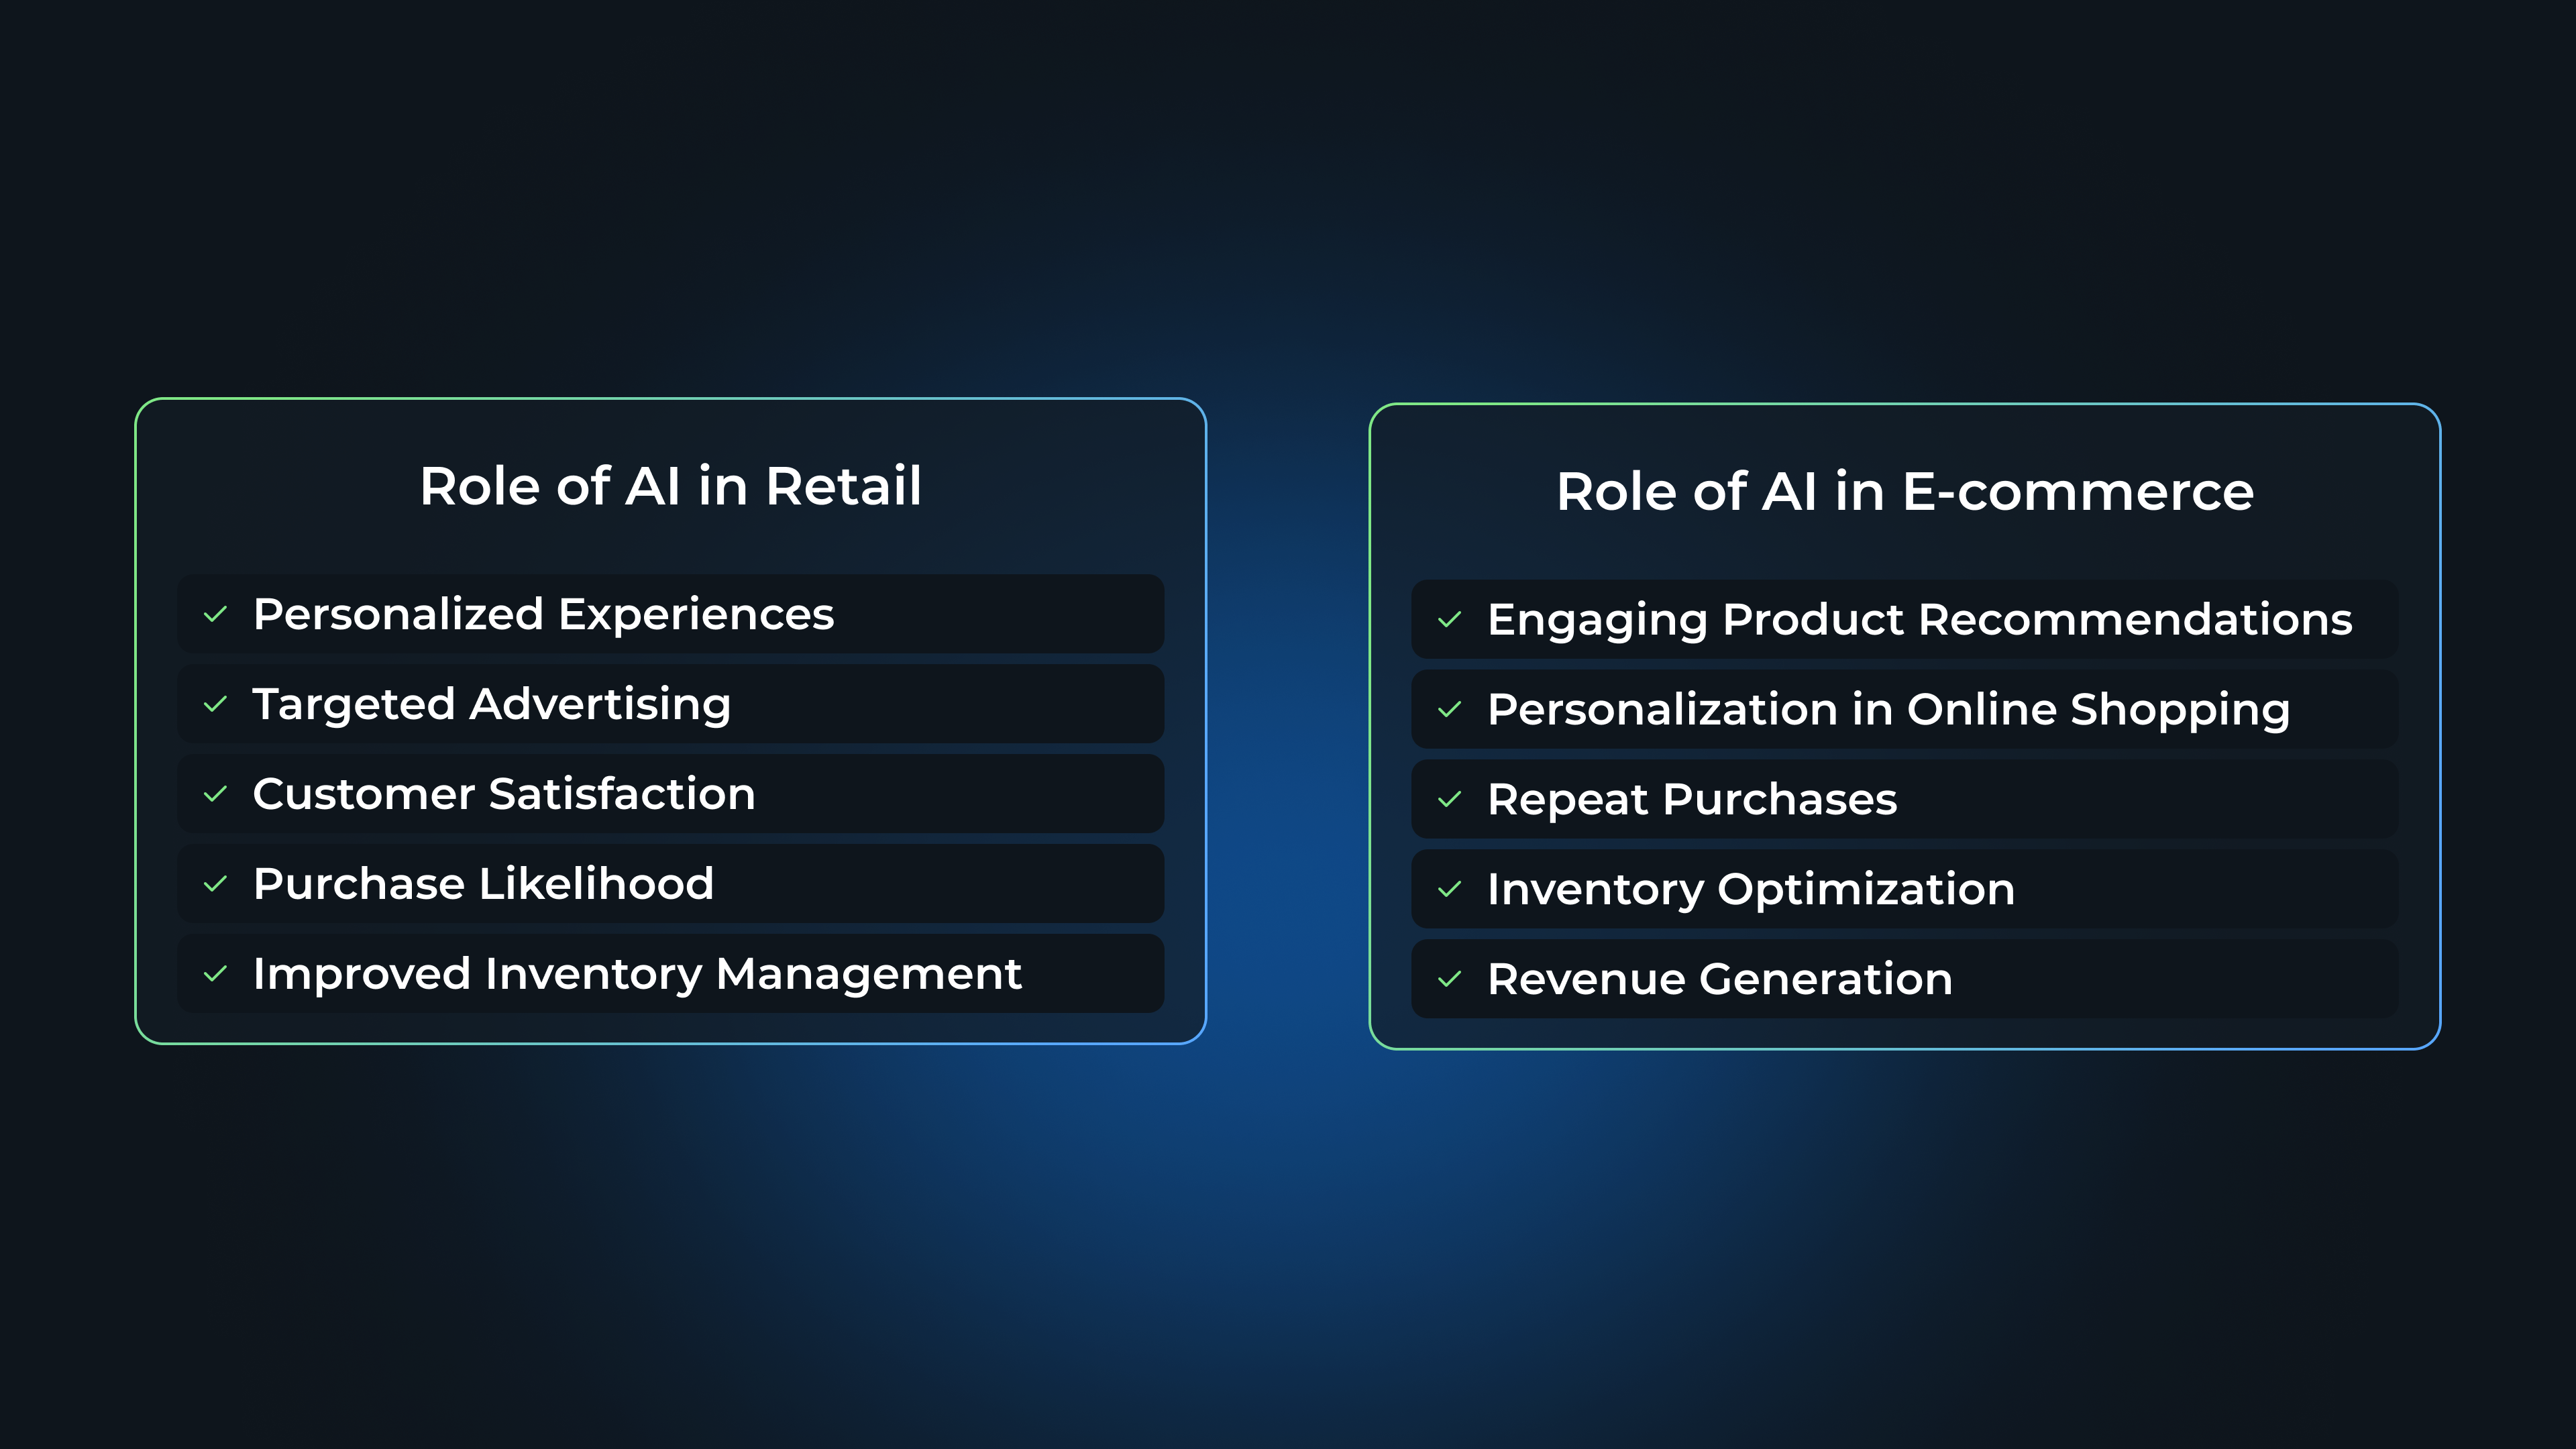 Role of AI in Retail: Personalized Experiences, Targeted Advertising, Customer Satisfaction, Purchase Likelihood
Improved Inventory Management.
Role of AI in E-commerce: Engaging Product Recommendations, Personalization in Online Shopping, Repeat Purchases, Inventory Optimization, Revenue Generation 
